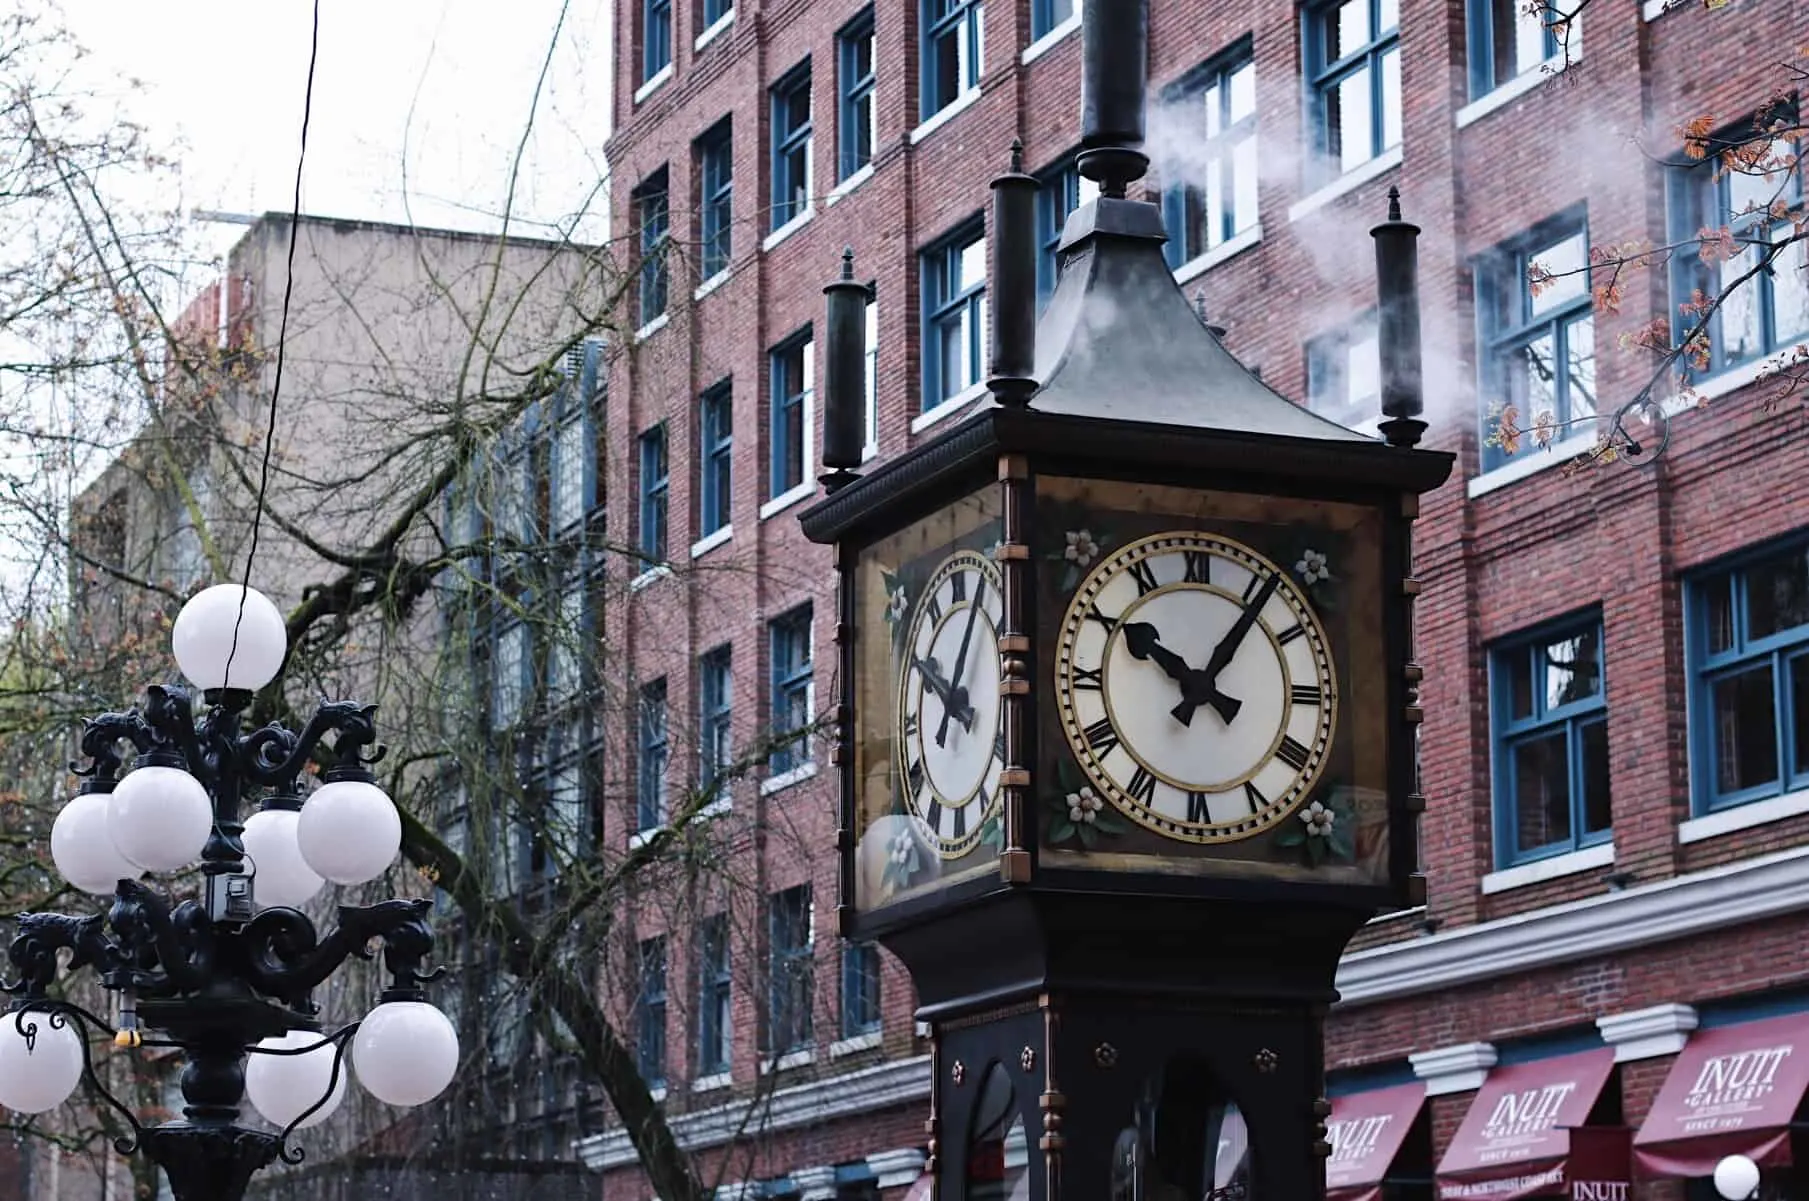 The Gastown Steam Clock is one of the only few steam clocks left in the world